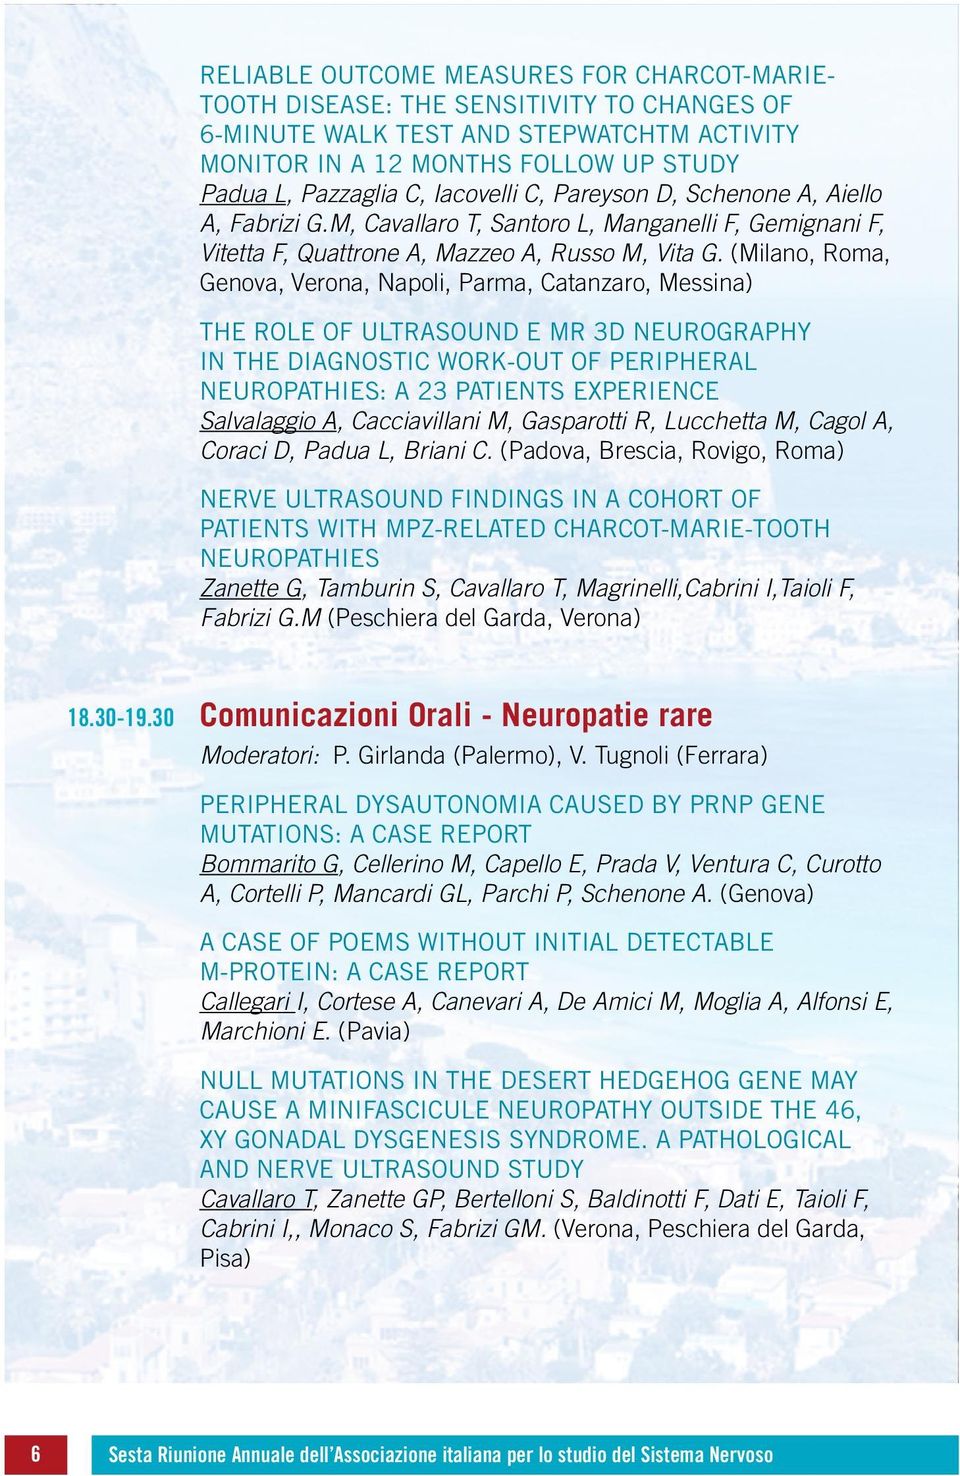 (Milano, Roma, Genova, Verona, Napoli, Parma, Catanzaro, Messina) THE ROLE OF ULTRASOUND E MR 3D NEUROGRAPHY IN THE DIAGNOSTIC WORK-OUT OF PERIPHERAL NEUROPATHIES: A 23 PATIENTS EXPERIENCE